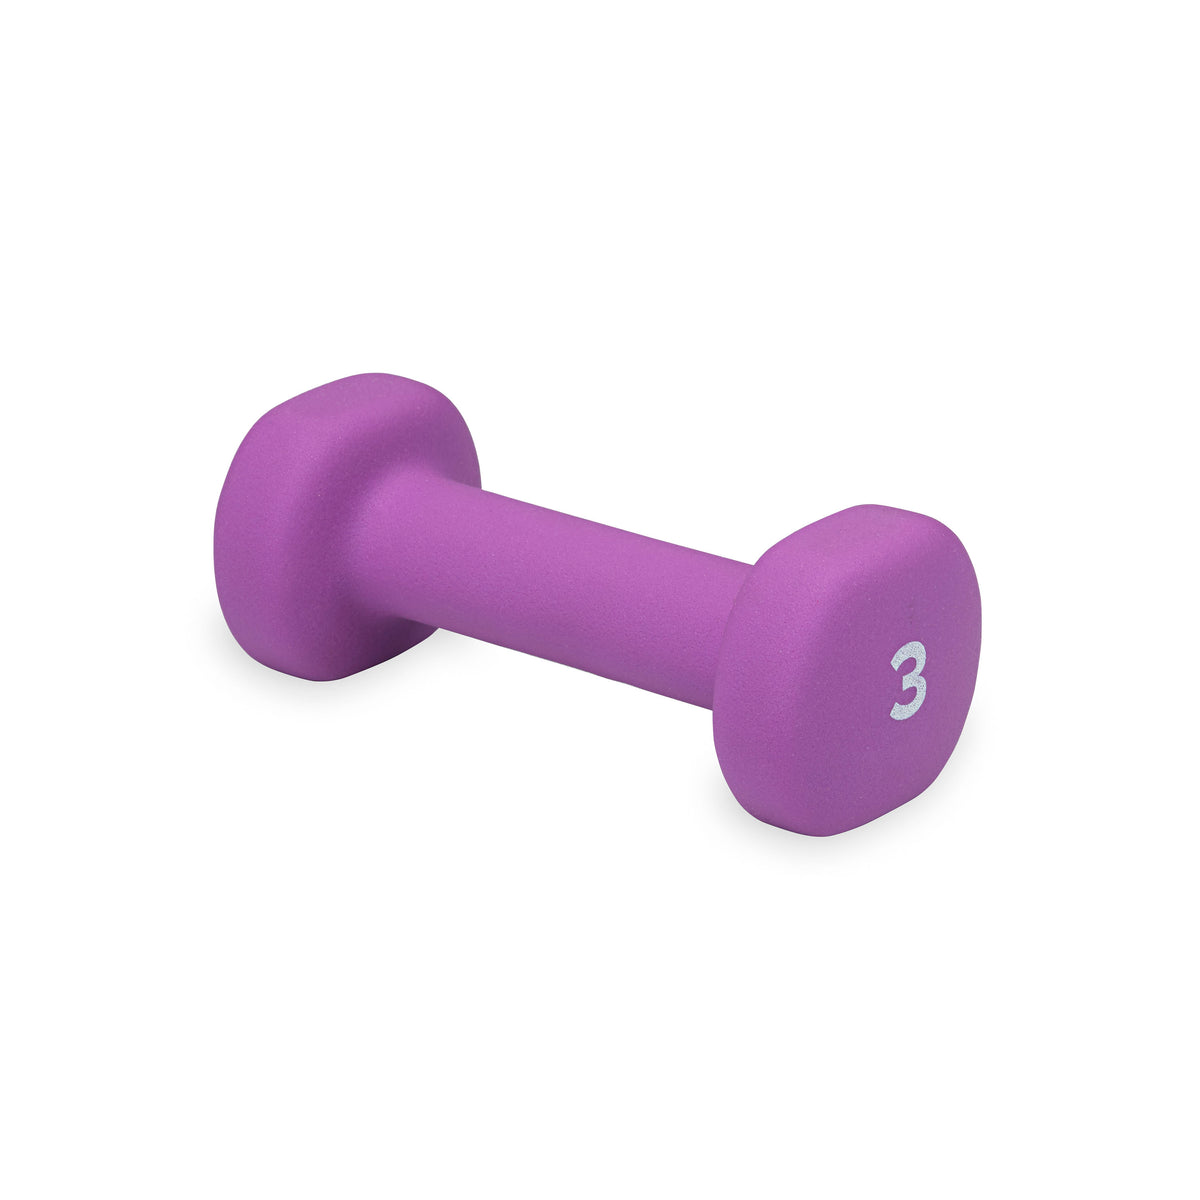 pink color dumbbell, exercise mat and water bottle on white